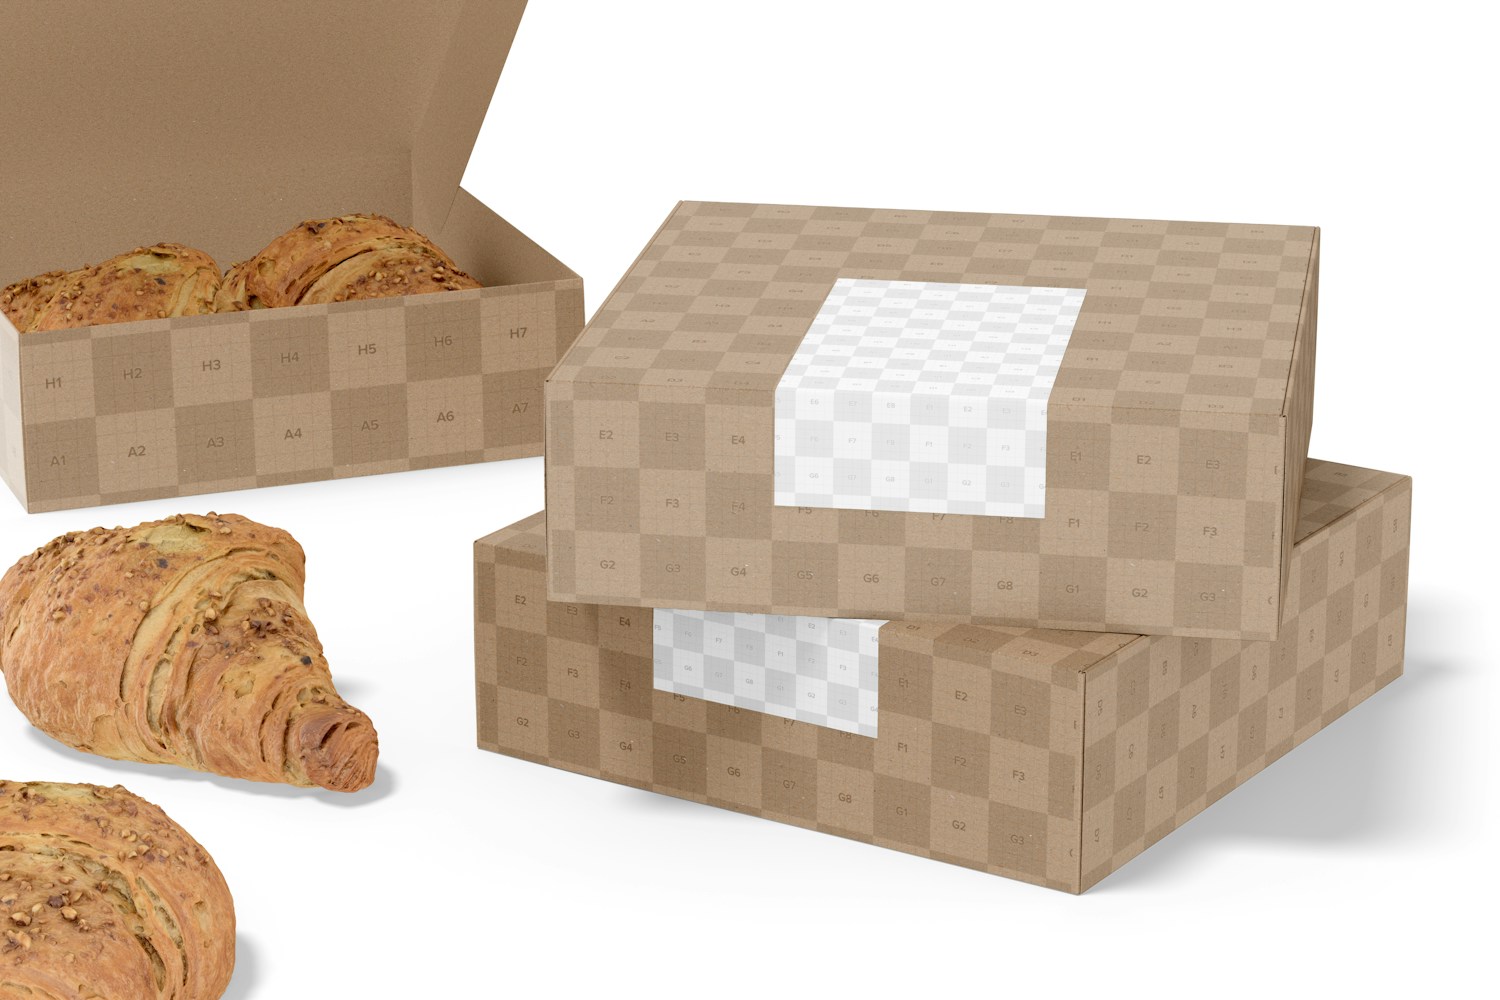 Bread Boxes with Label Mockup